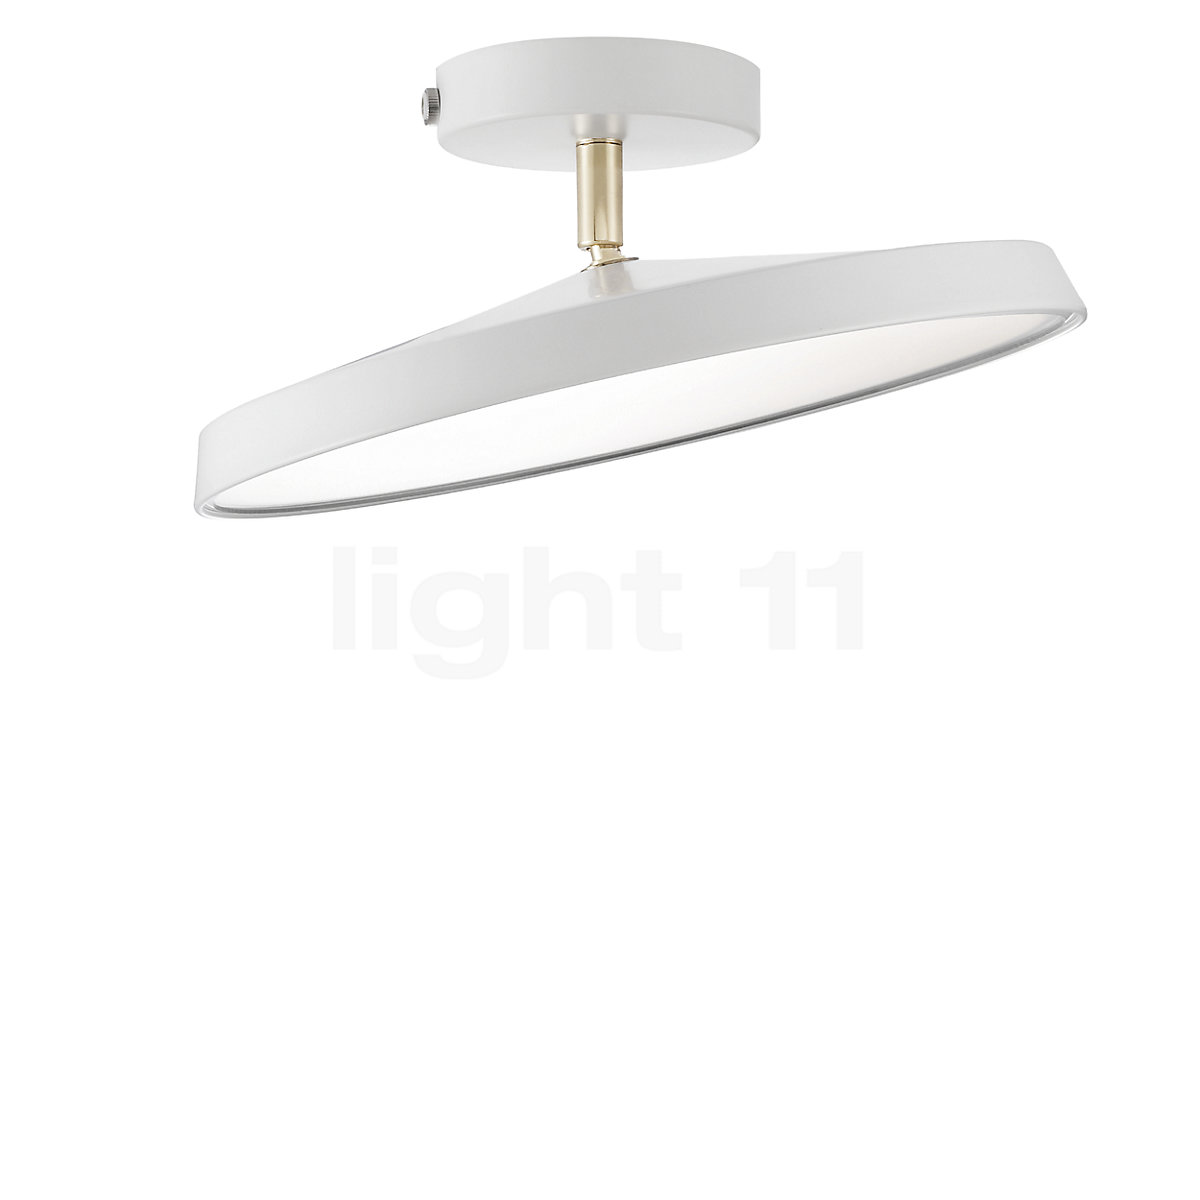 Buy Design for the People LED Kaito at Ceiling Pro Light